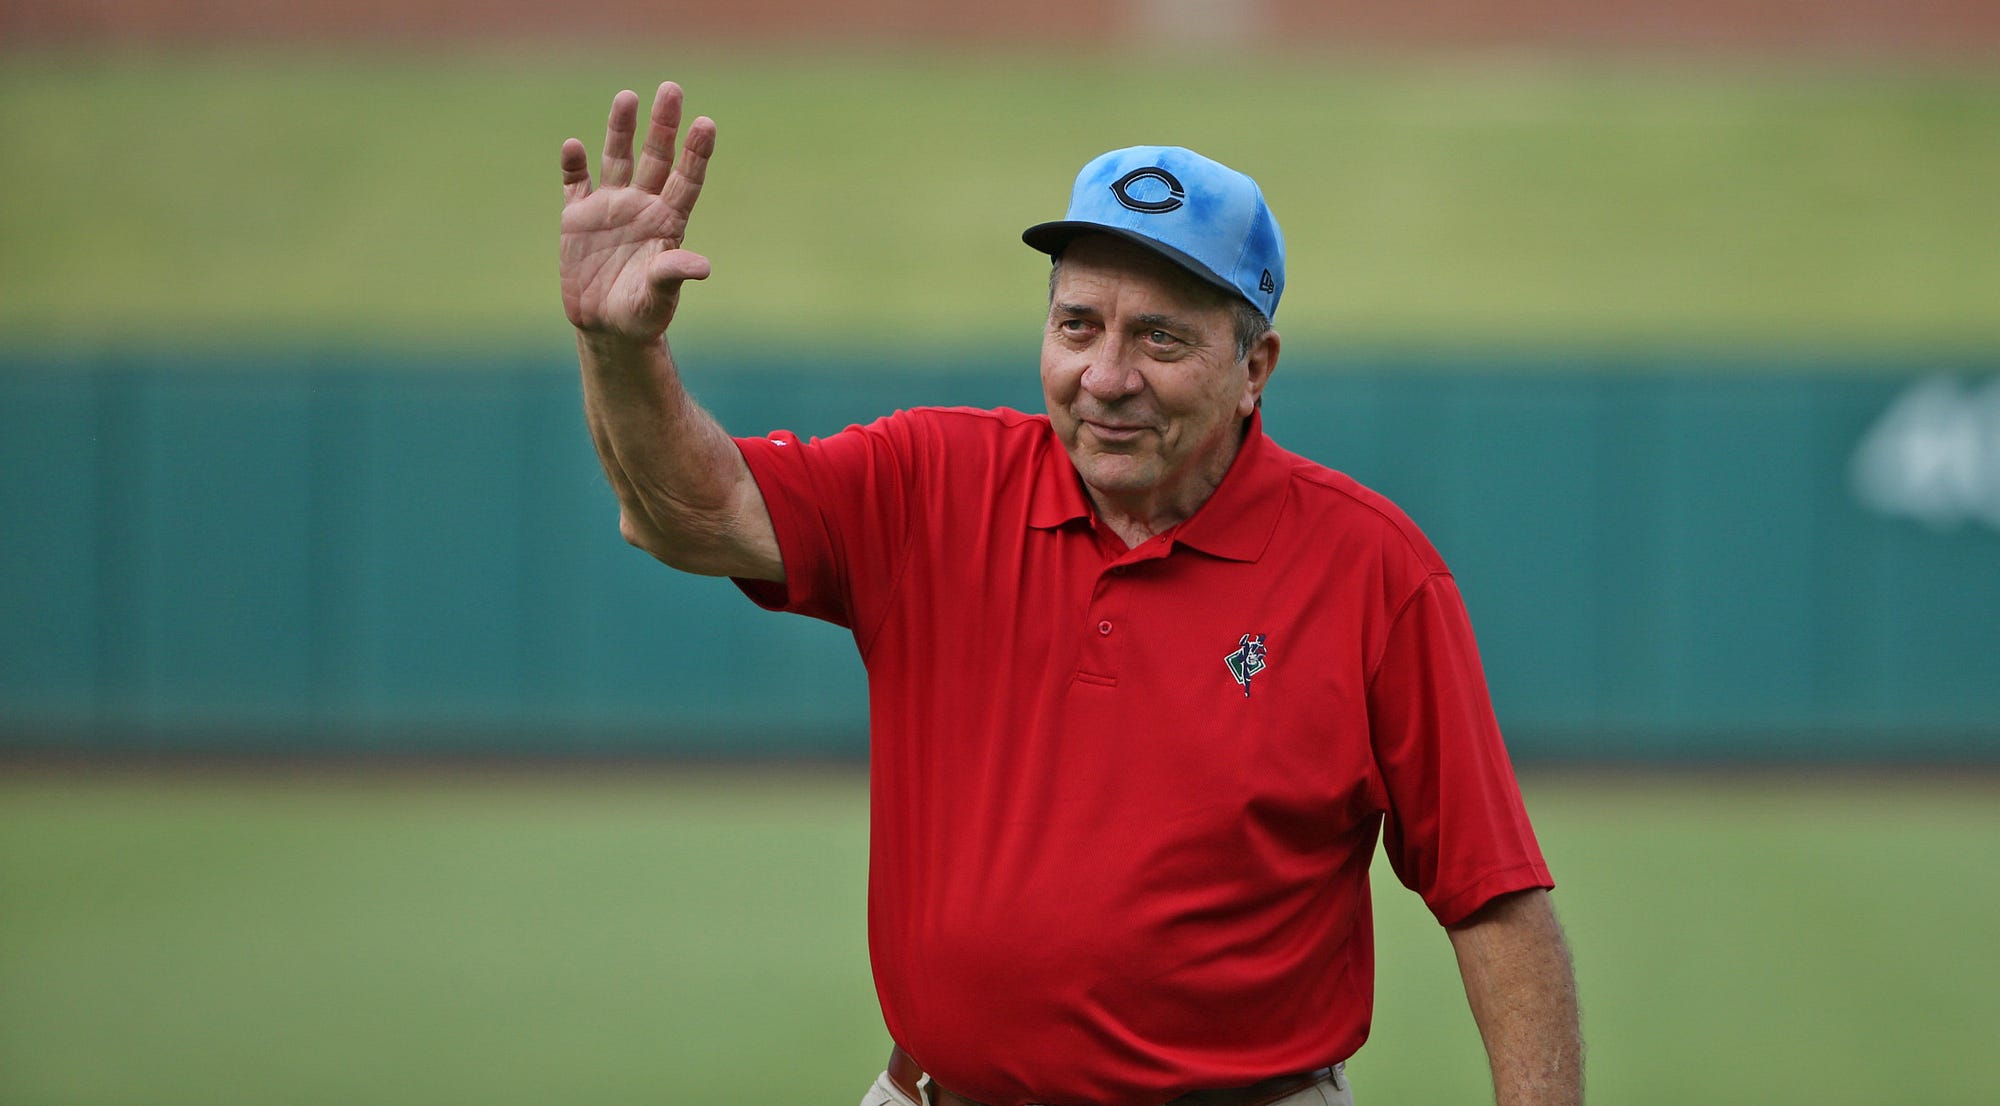 A Look Back at Johnny Bench's 2019 OKC Visit, by Lisa Johnson, Beyond the  Bricks